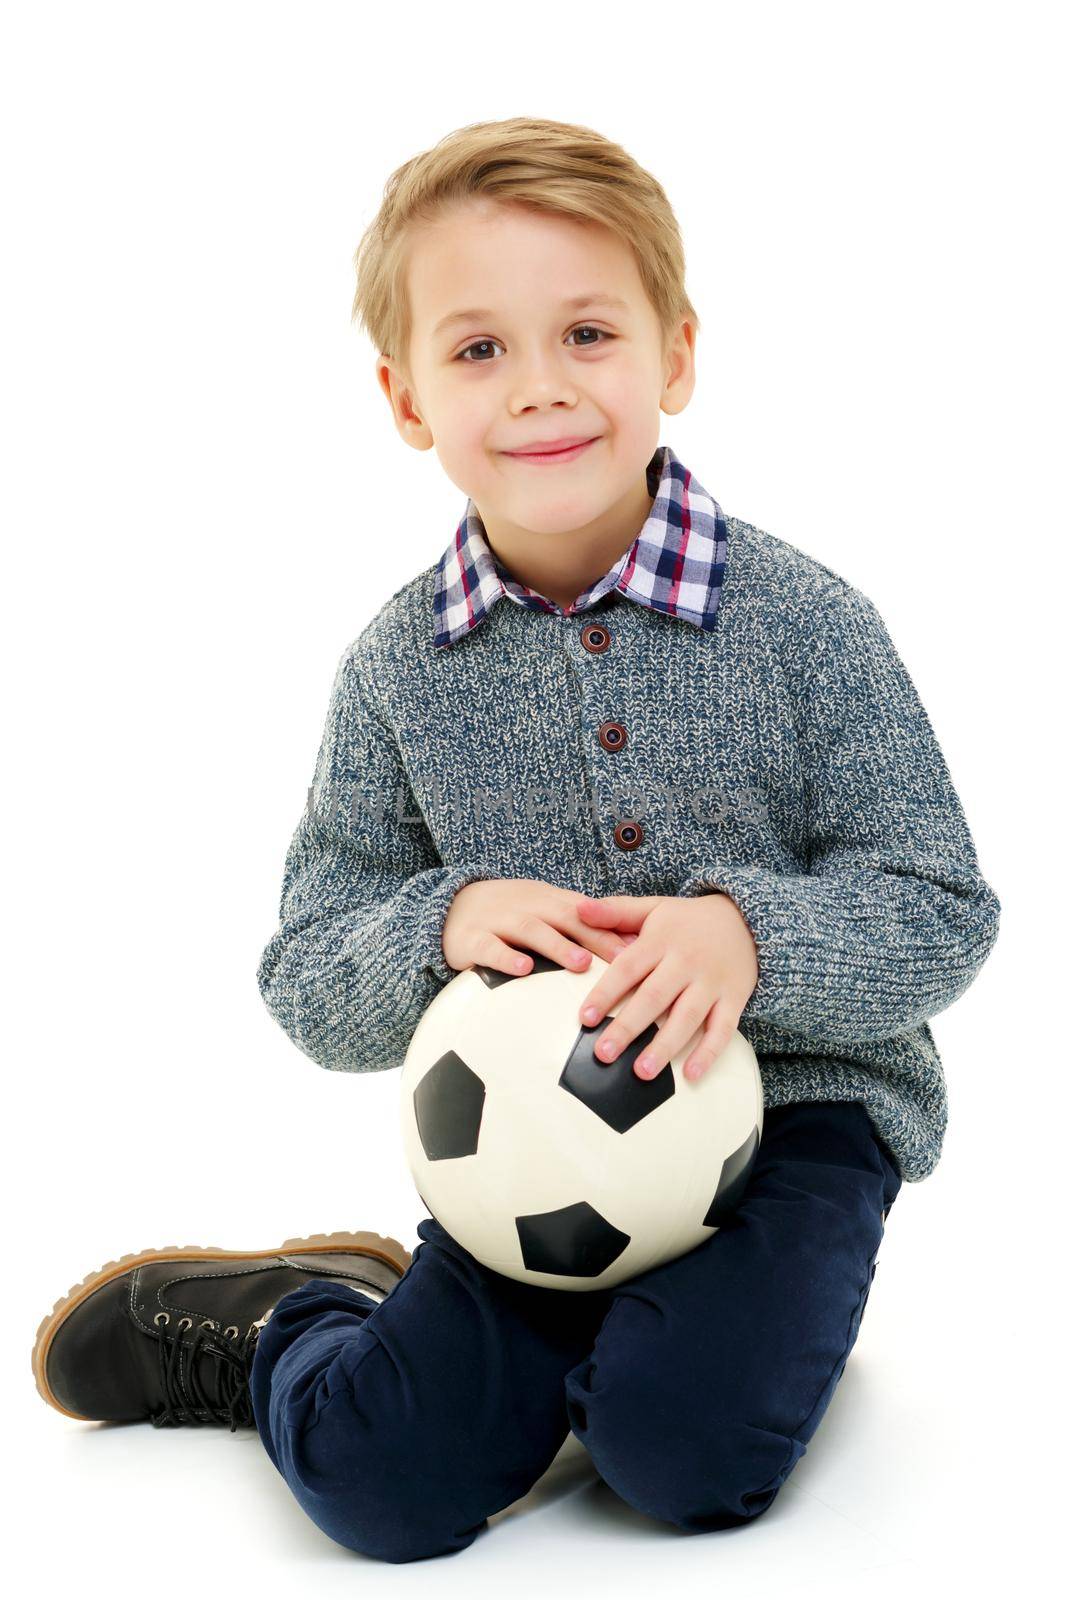 A sporty little boy is playing with a soccer ball. Concept of a healthy lifestyle, sport and fitness. Isolated on white background.